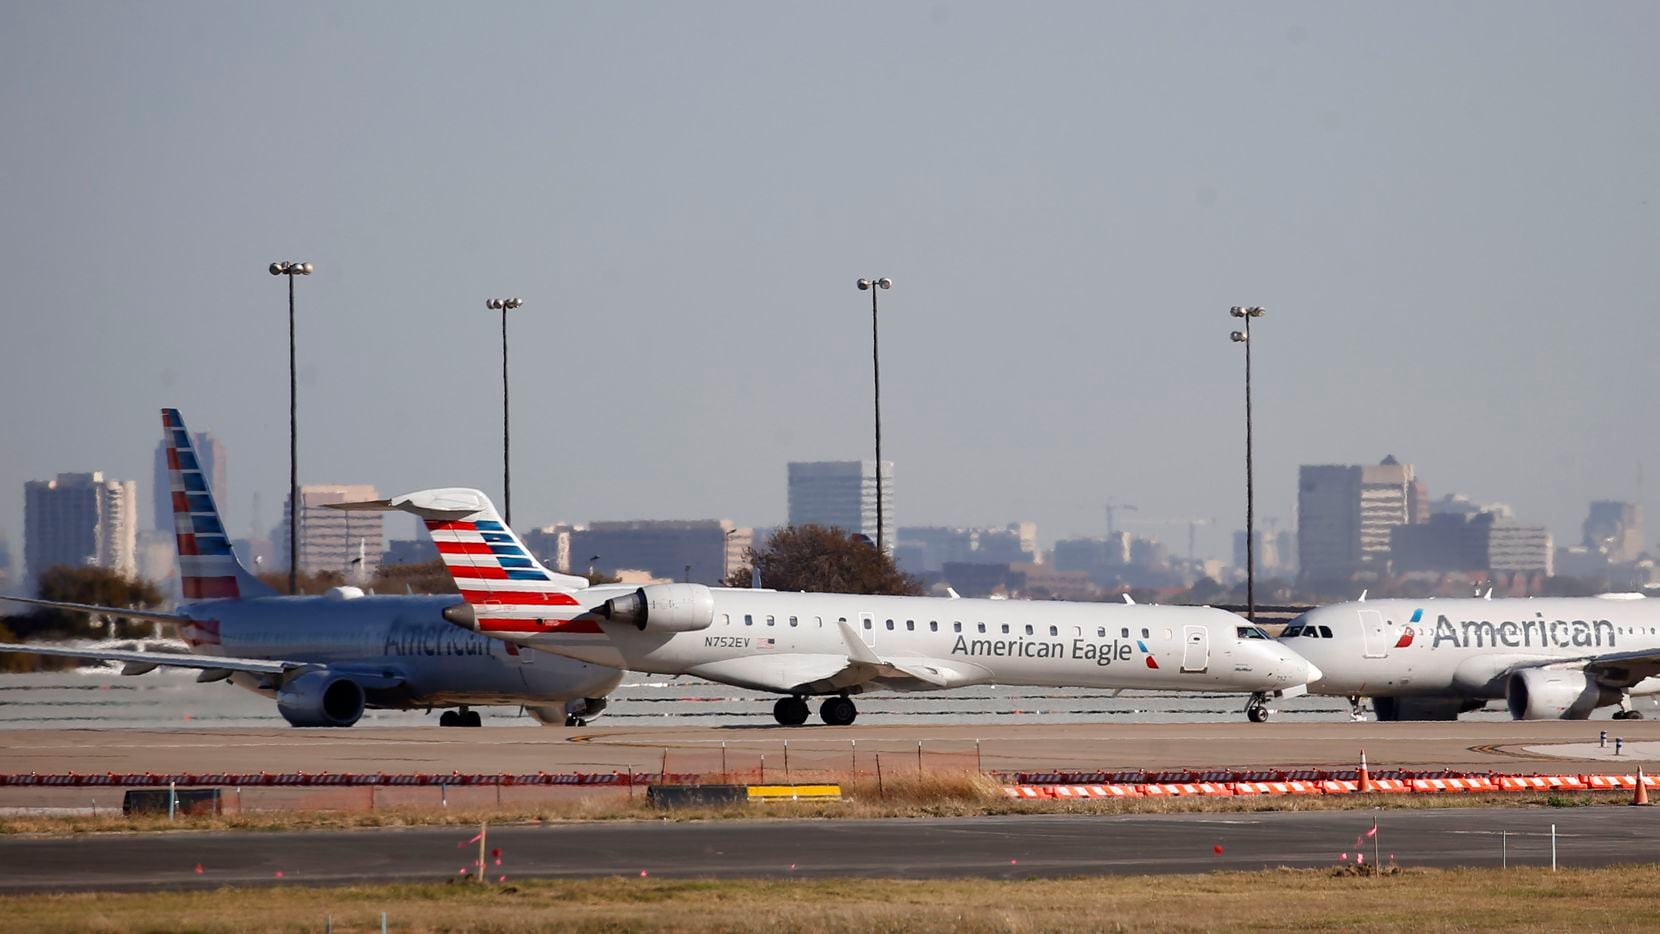 American Eagle and American Airlines planes made their way toward the runway before taking...